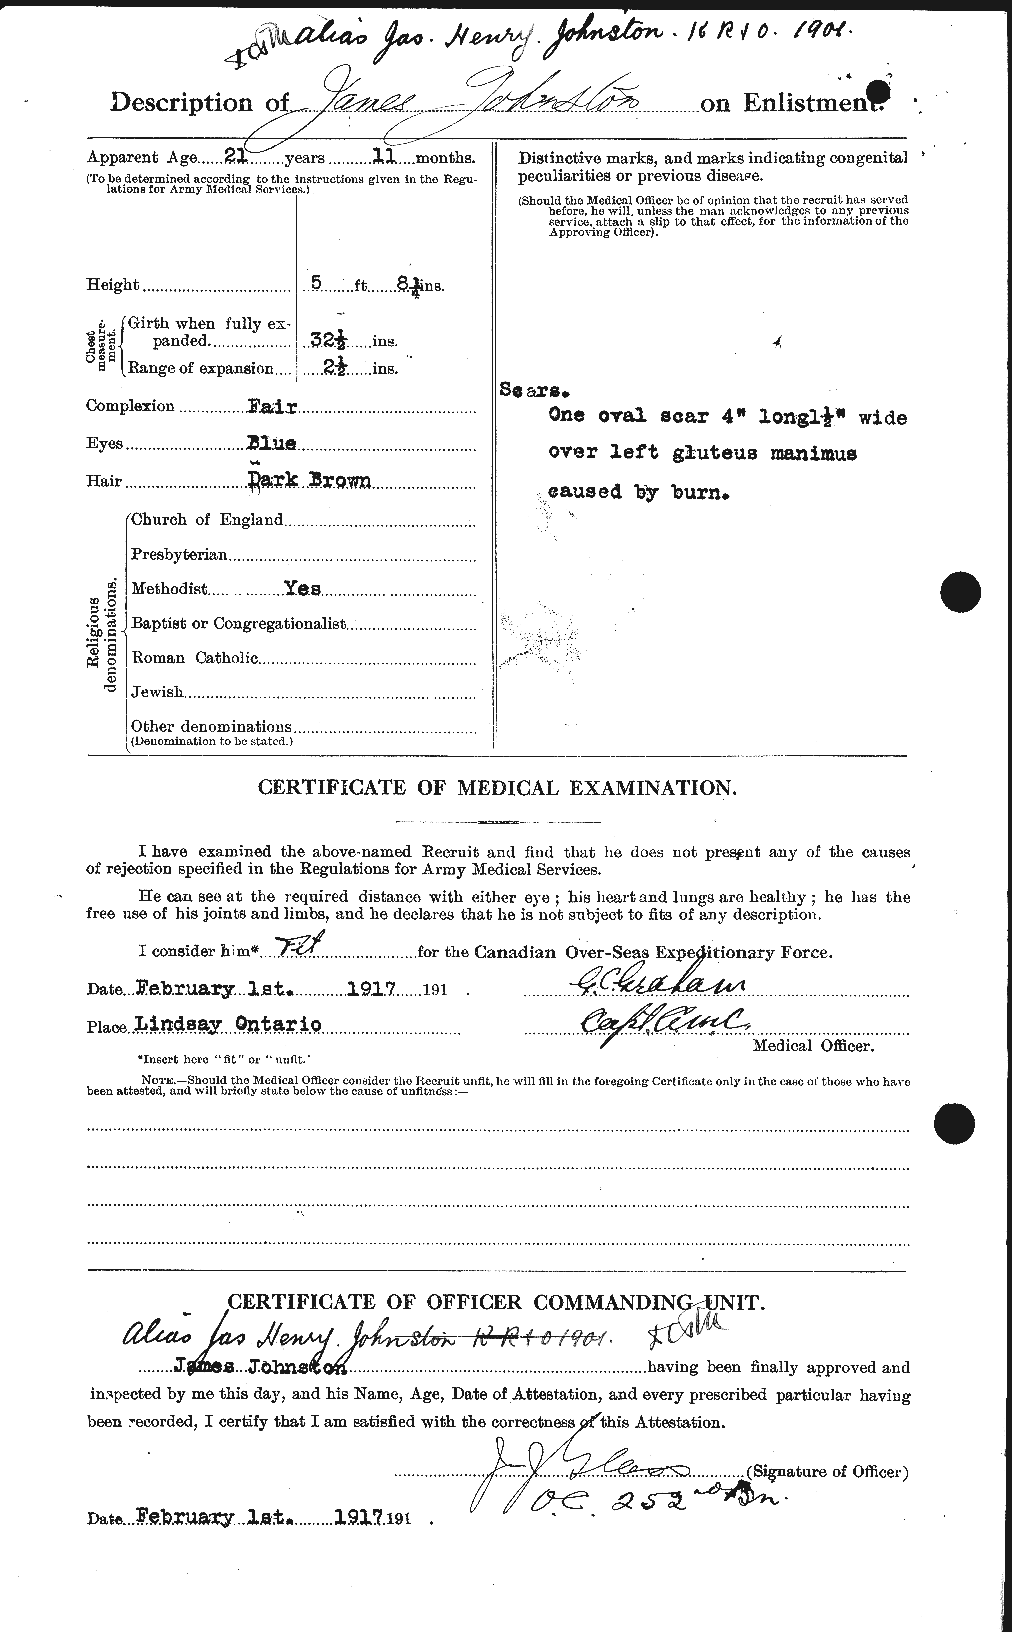 Personnel Records of the First World War - CEF 422737b